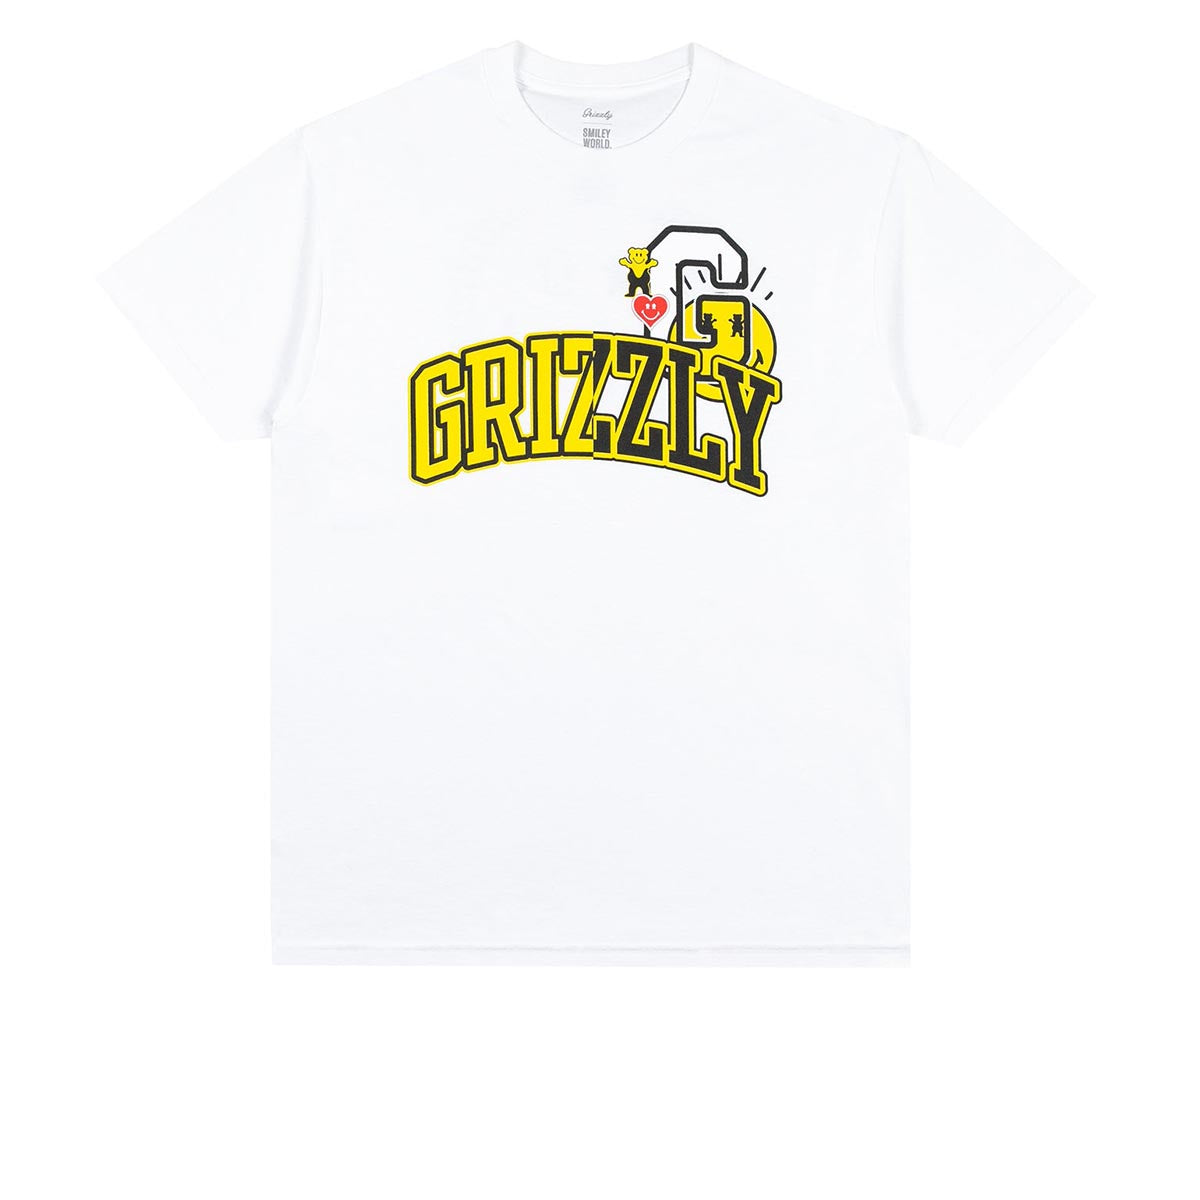 Grizzly x Smiley World School Of Happiness T-Shirt - White image 1